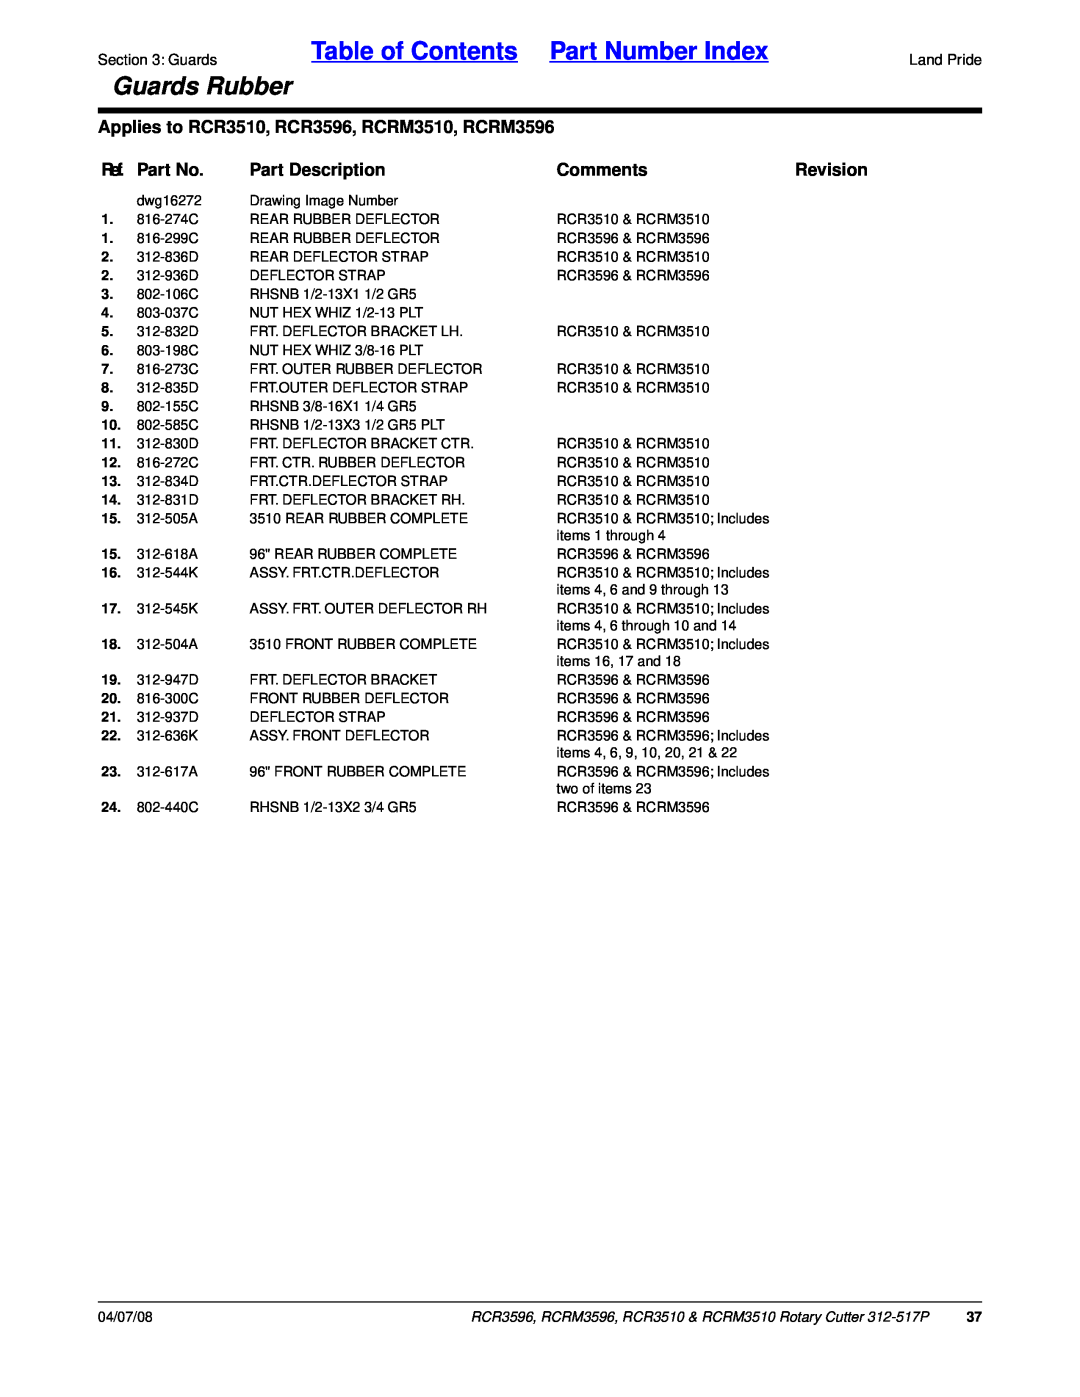 Land Pride manual Table of Contents Part Number Index, Guards Rubber, Applies to RCR3510, RCR3596, RCRM3510, RCRM3596 